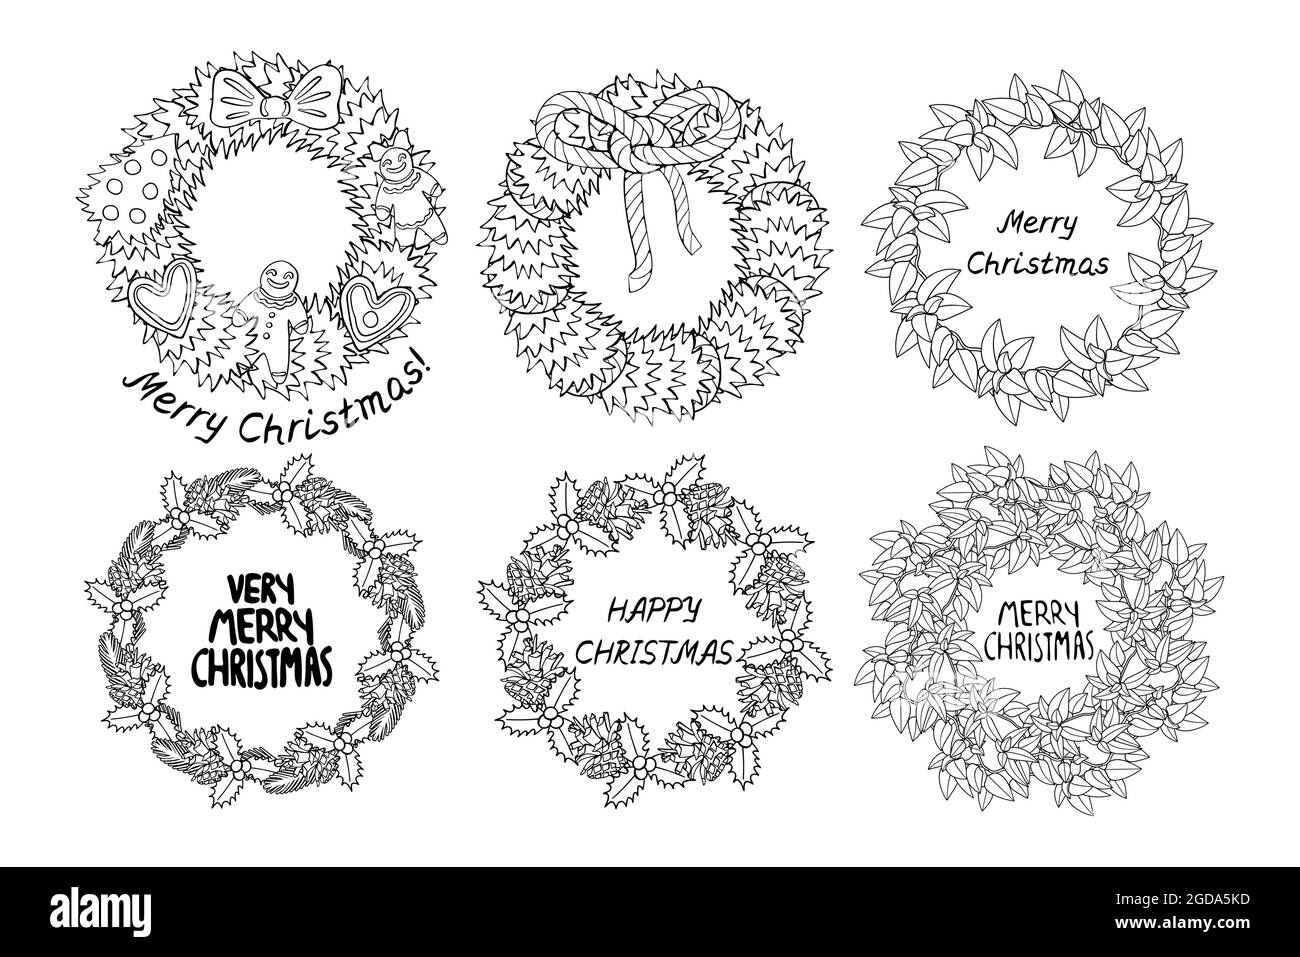 Monochrome Line Art Christmas Wreaths clipart set, decorated spruce branches. Stock Vector